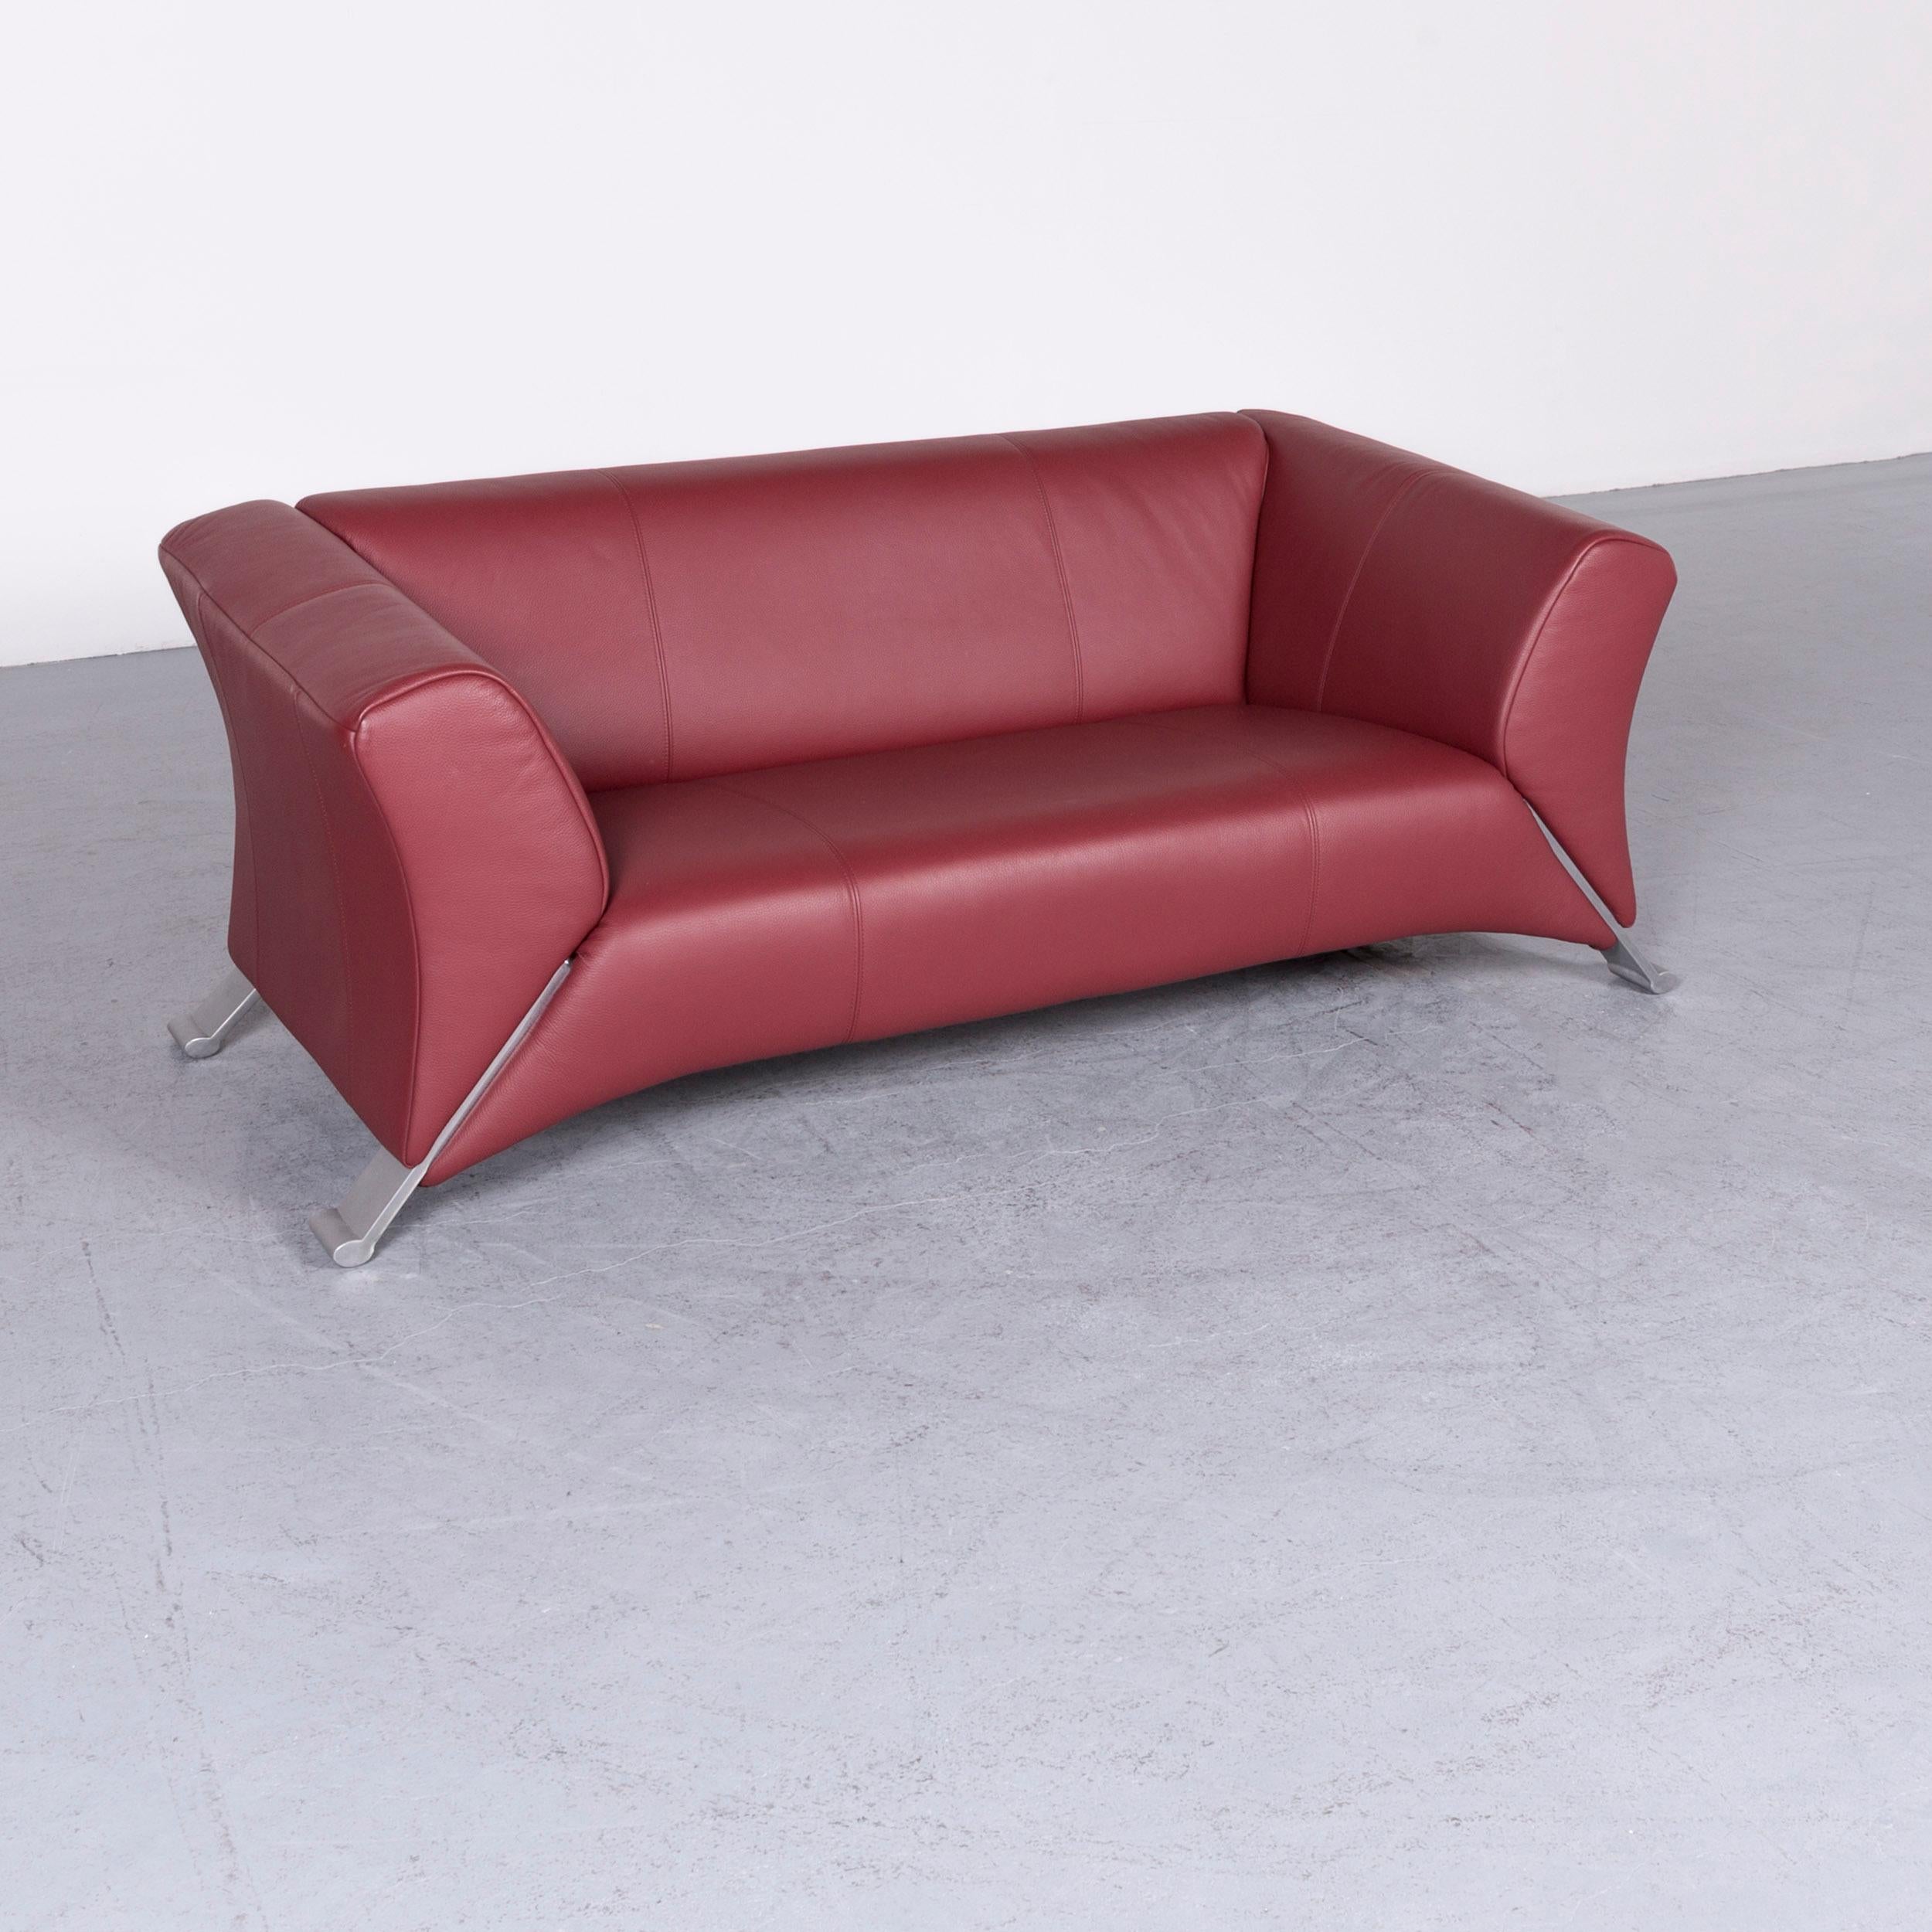 We bring to you a Rolf Benz 322 designer sofa red two-seat leather couch.